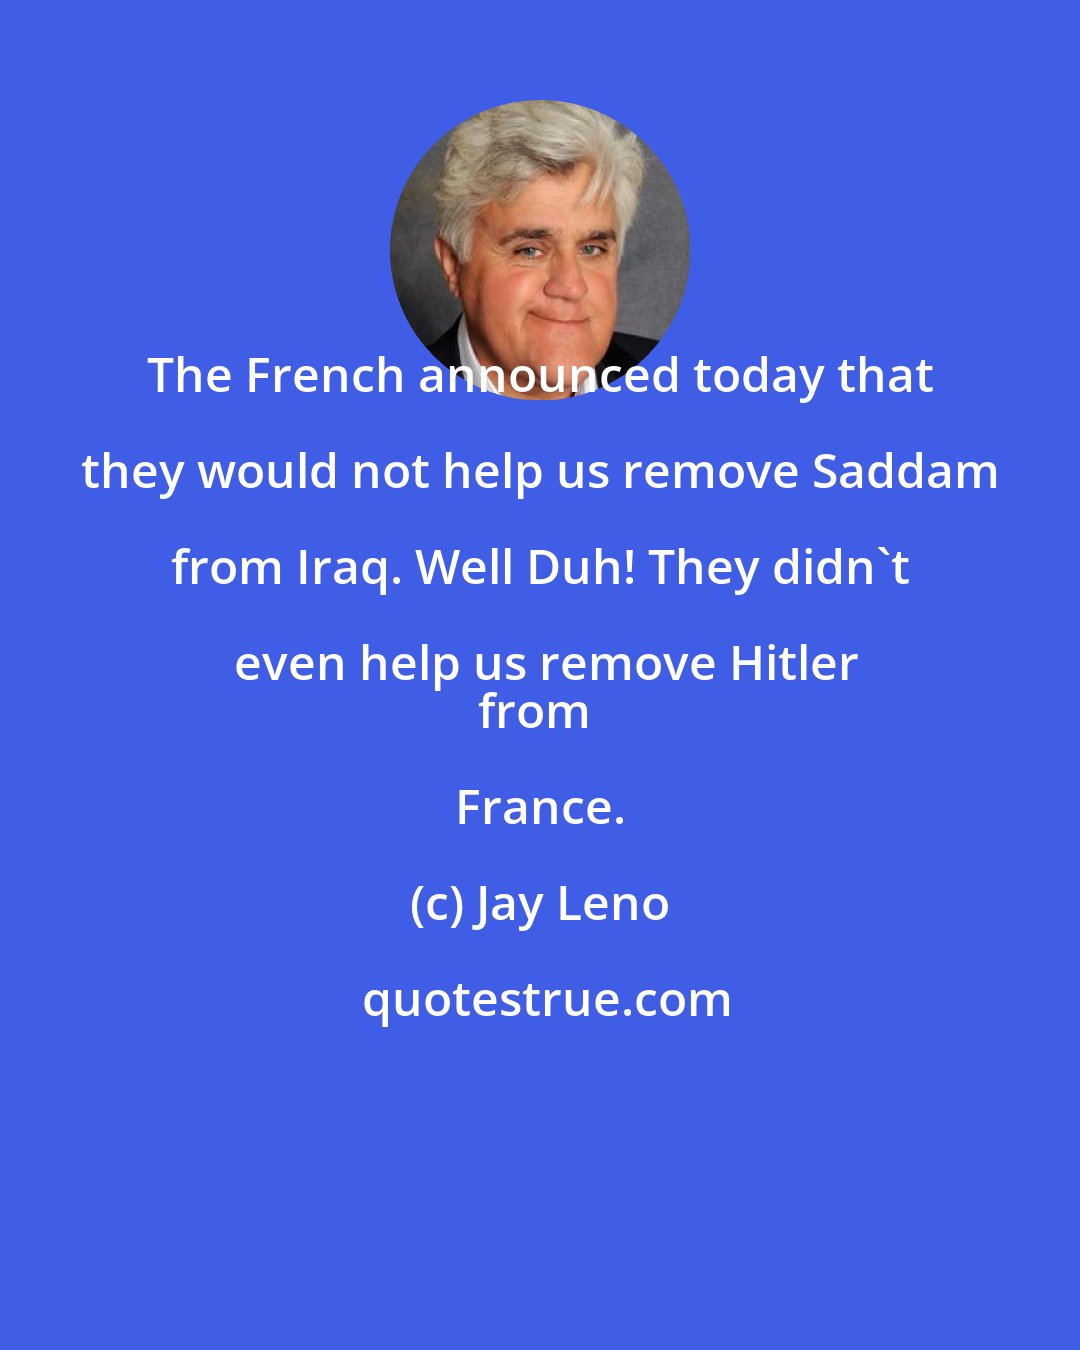 Jay Leno: The French announced today that they would not help us remove Saddam from Iraq. Well Duh! They didn't even help us remove Hitler
from France.